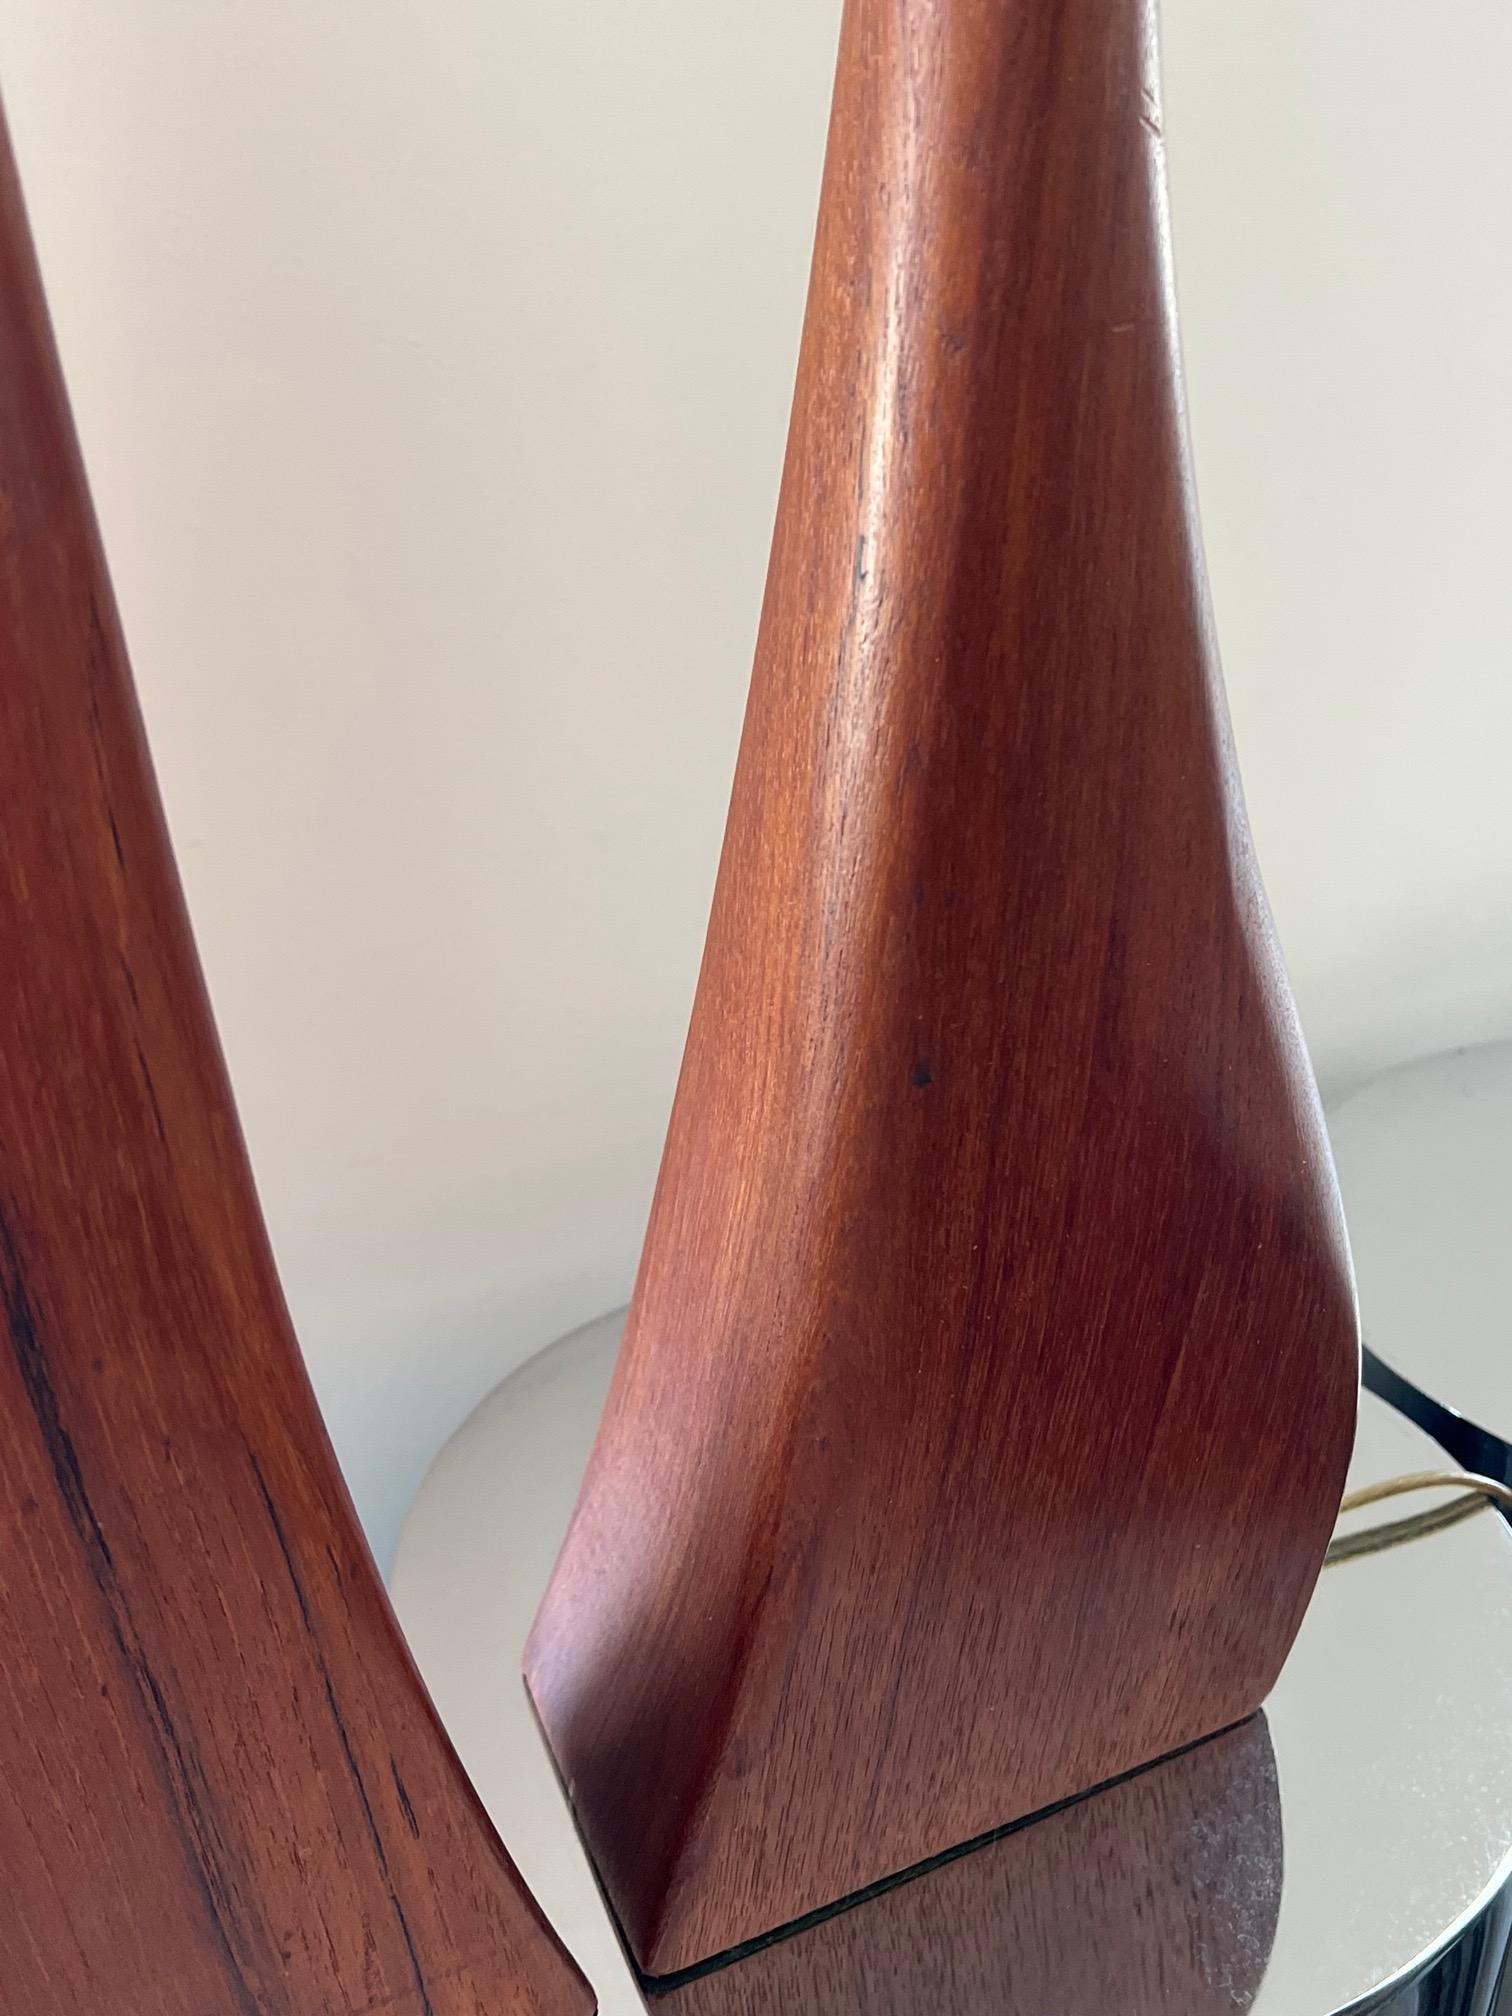 Mid-20th Century Beautiful Pair of Danish Modern Biomorphic Teak Lamps by Johannes Aasbjerg For Sale